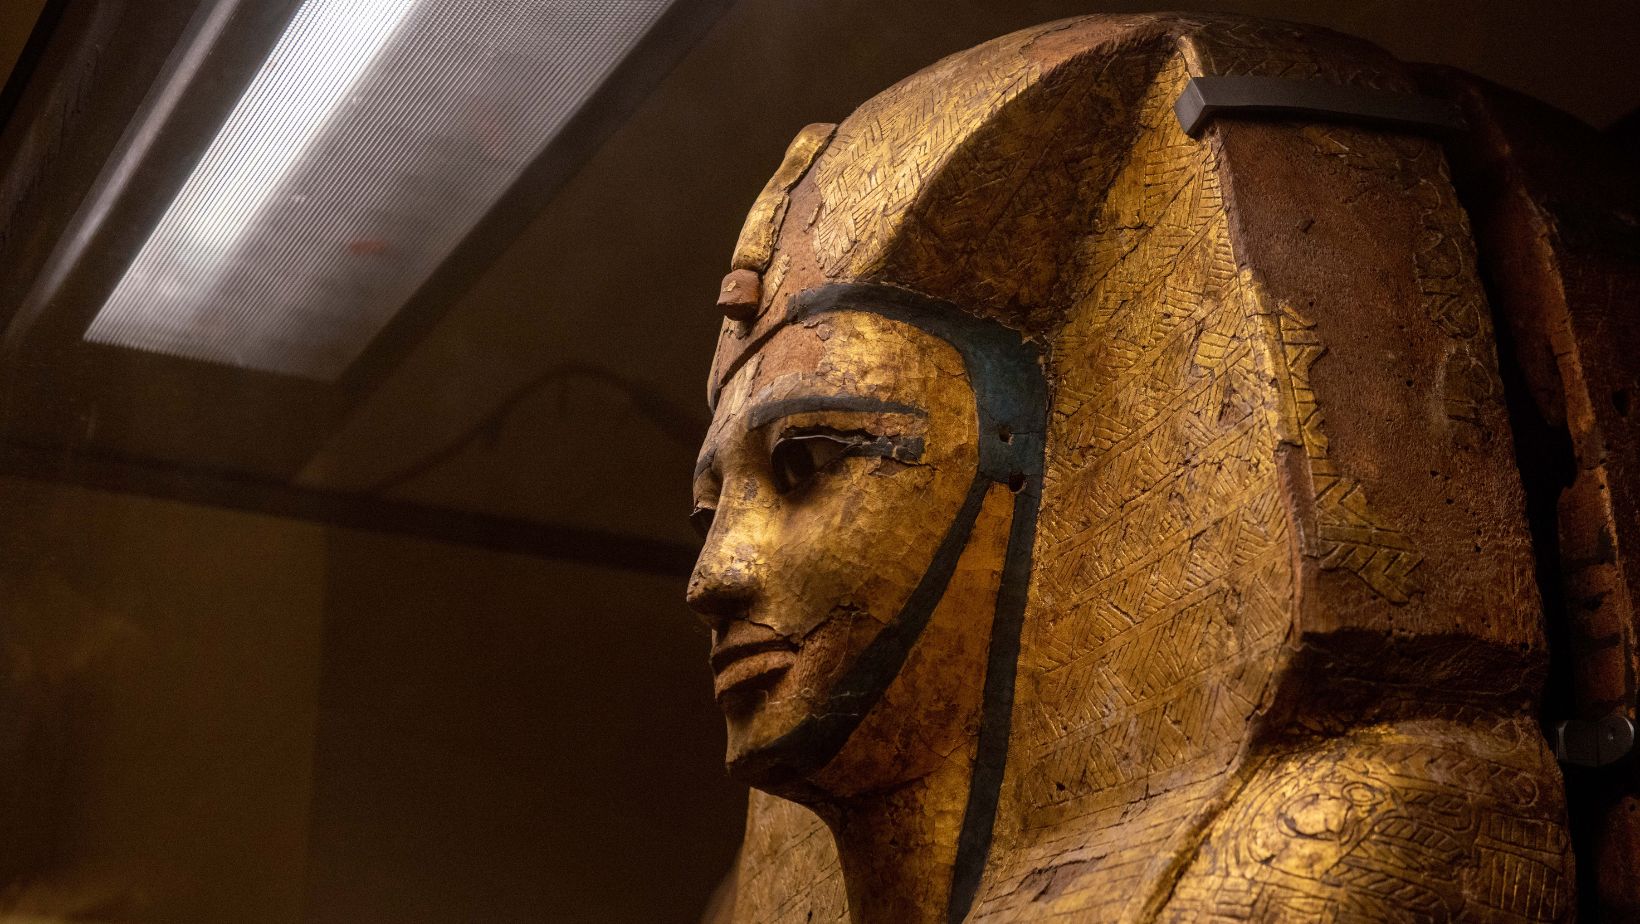 in addition to being the leader of egypt, what role did the pharaoh play?